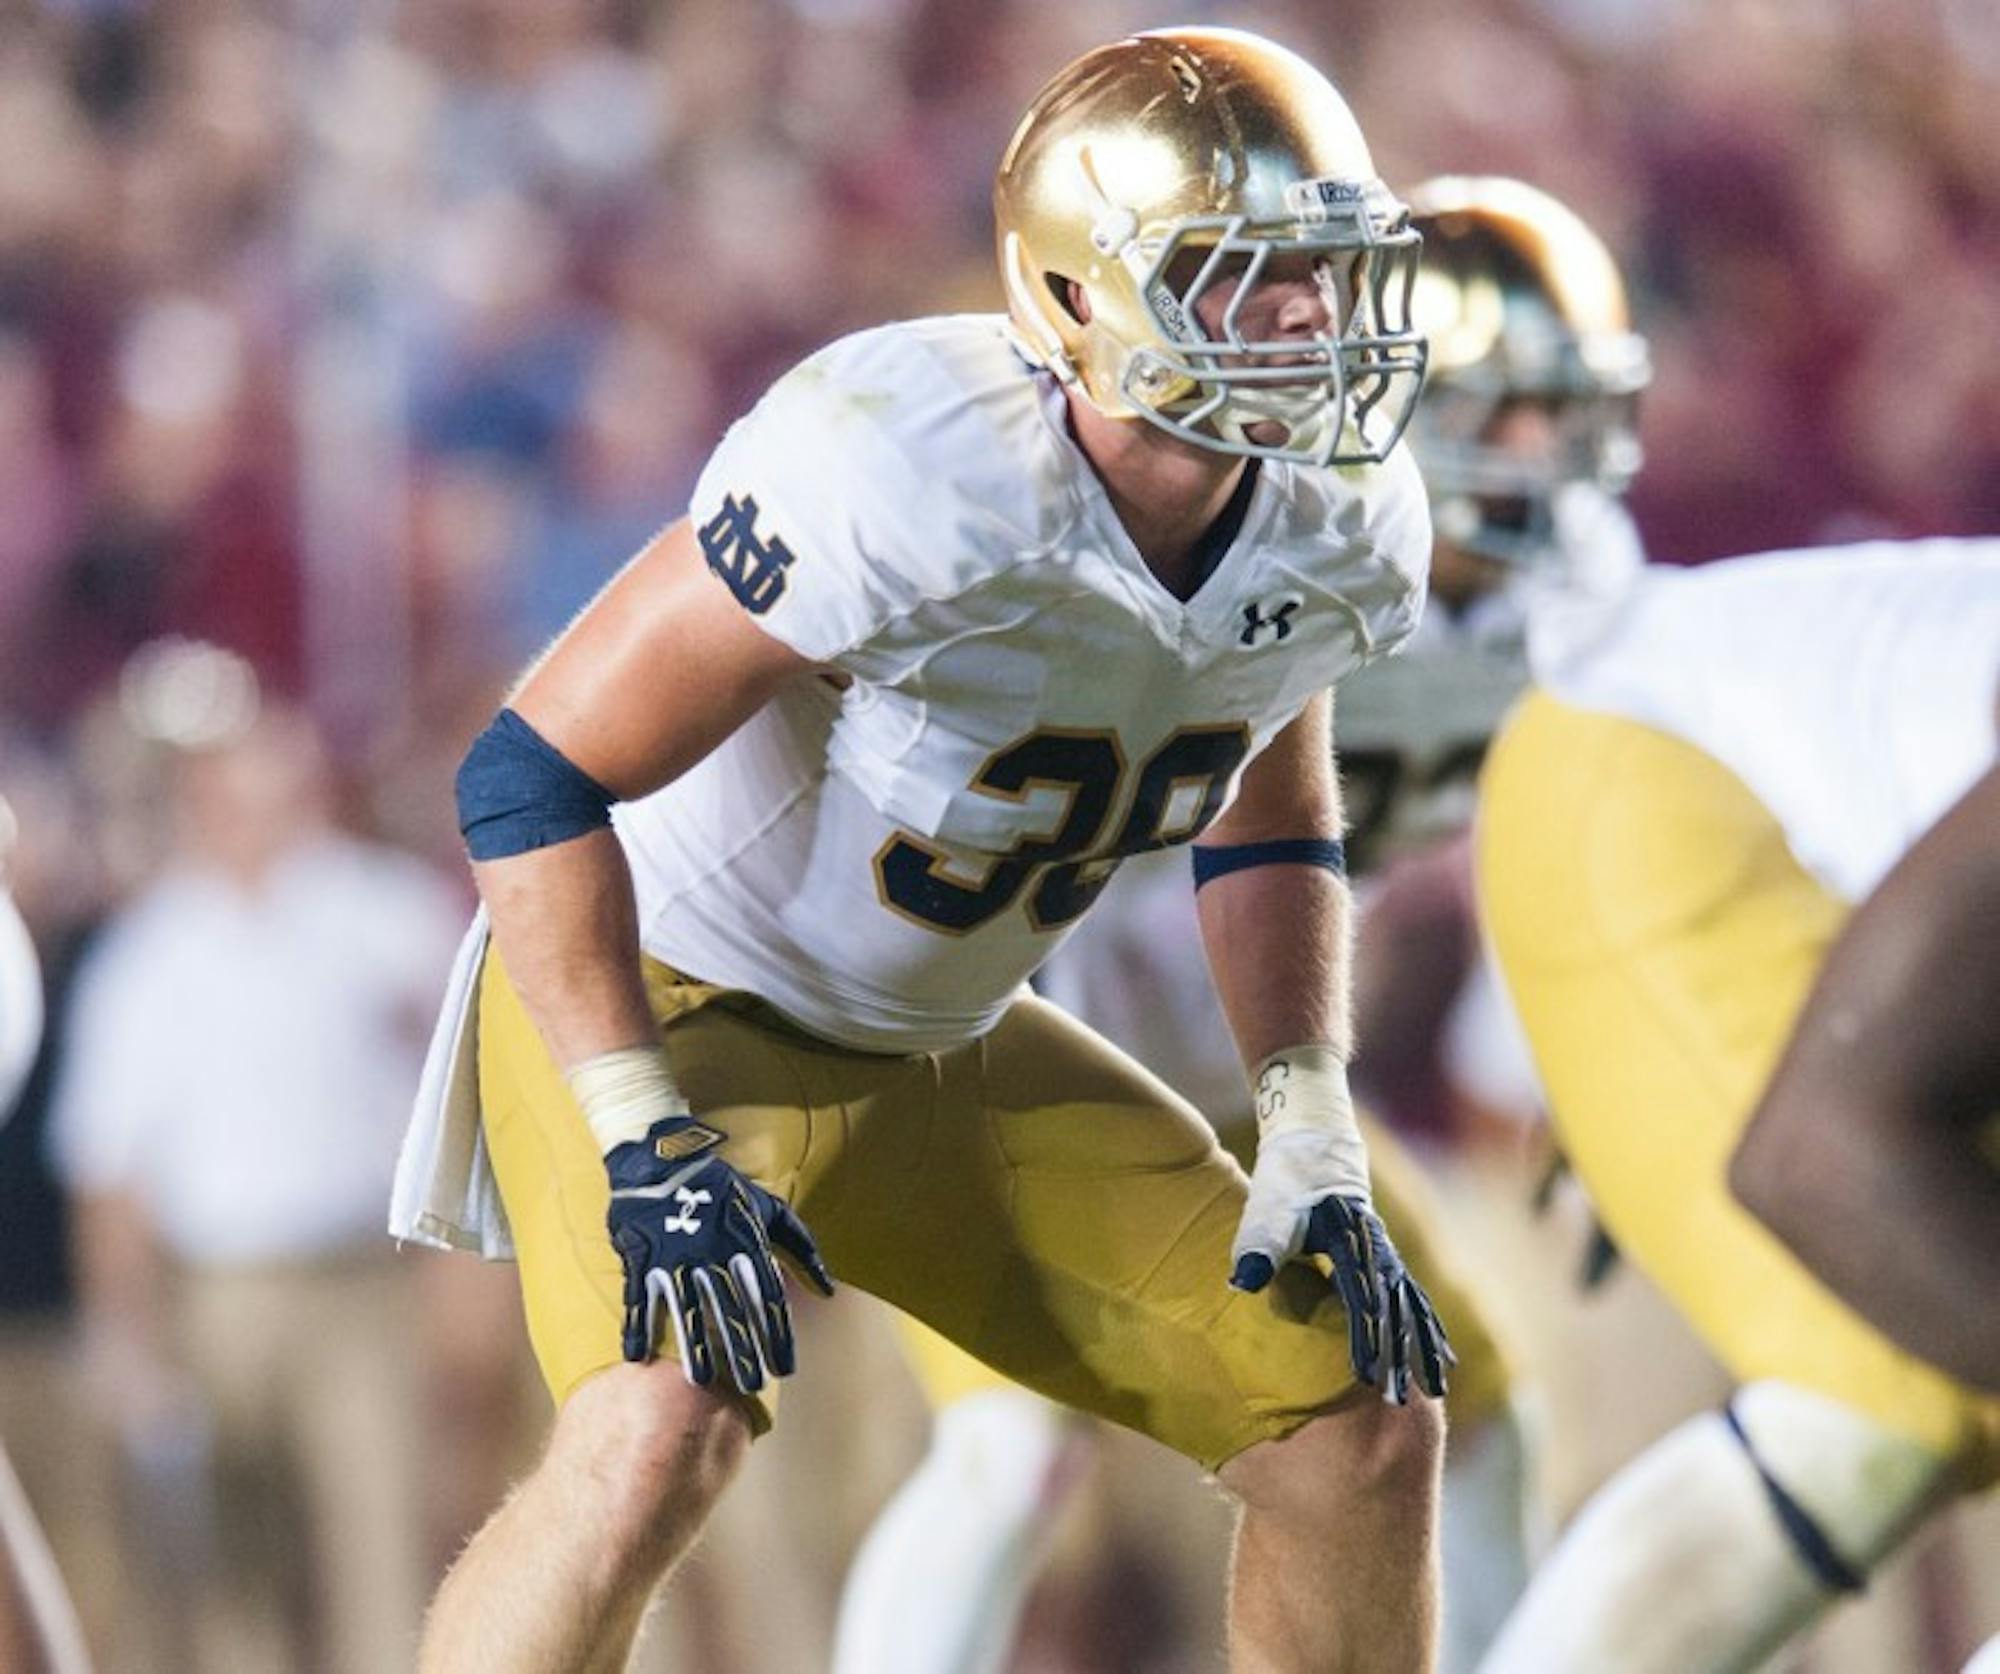 Senior linebacker Joe Schmidt readies for the snap during the Oct. 18 loss to Florida State. Schmidt suffered a season-ending injury Saturday against Navy.